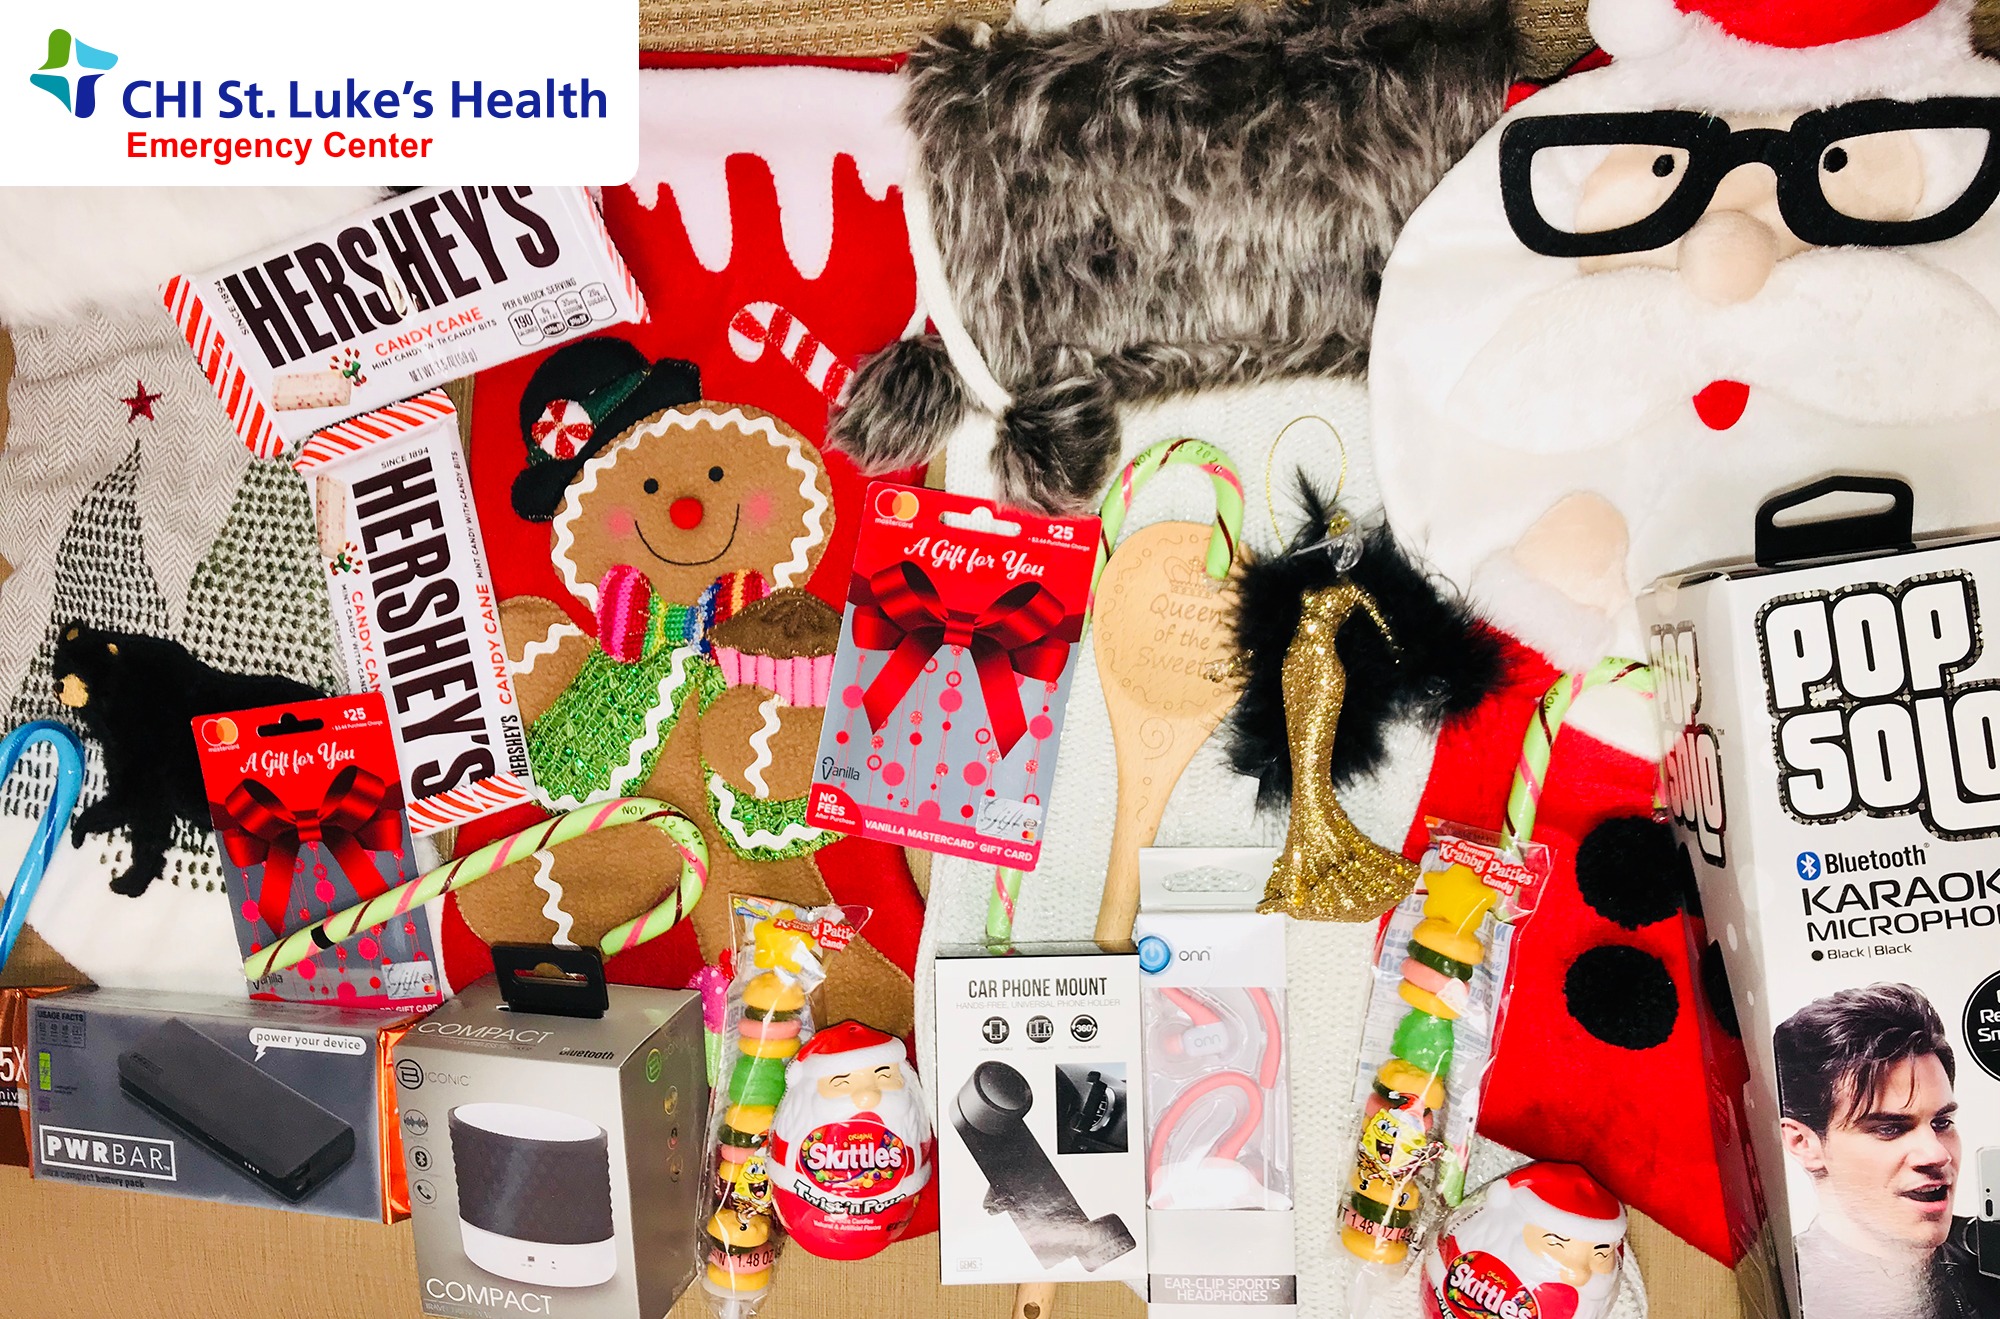 Win-a-Family-Pack-of-Christmas-Stockings-Stuffed-with-Goodies-Lufkin-Emergency-Center